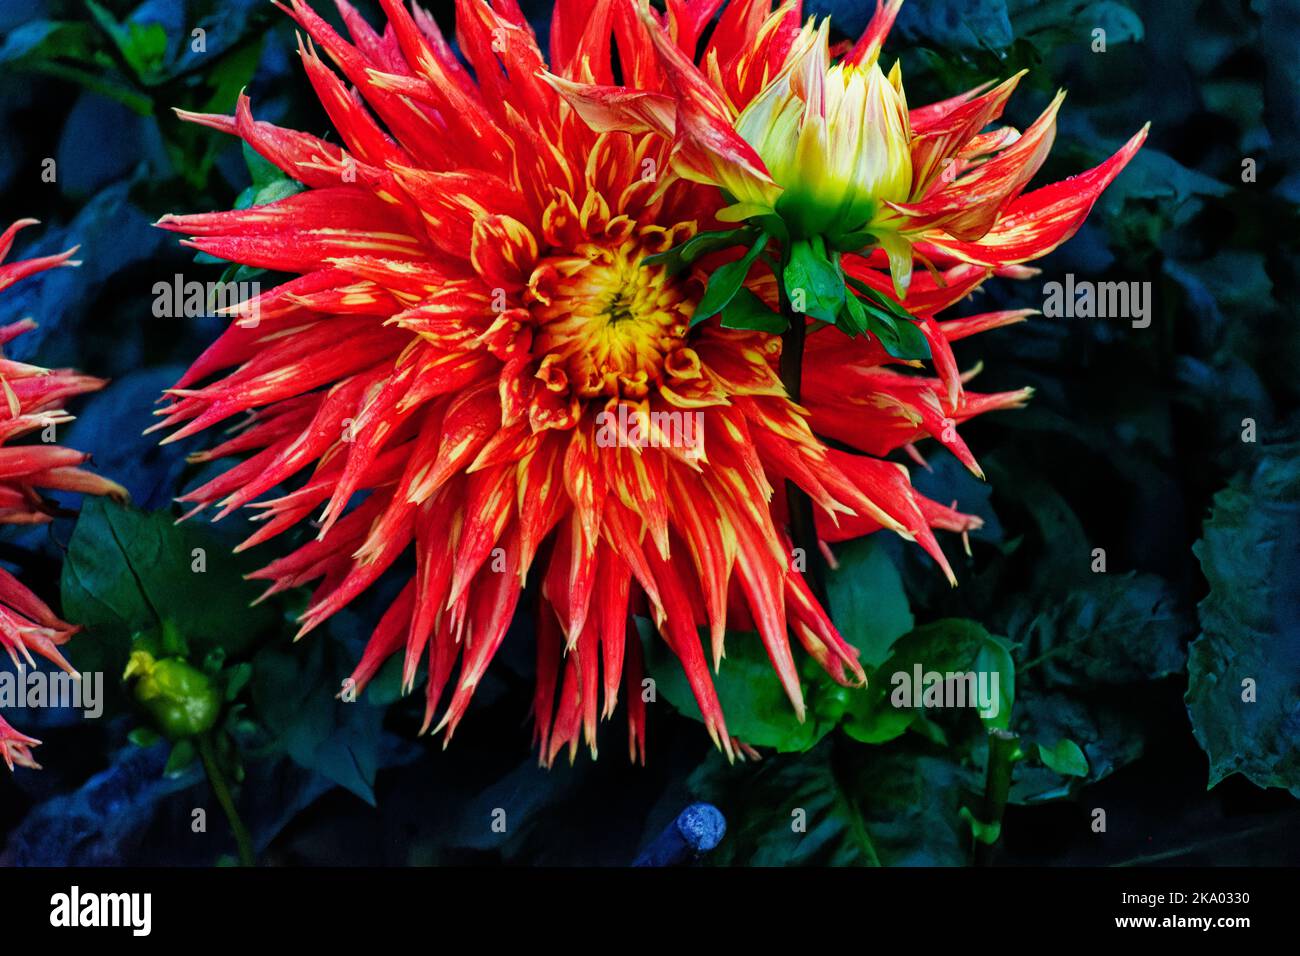 red Dahlia head with yellow tips on the petals Stock Photo